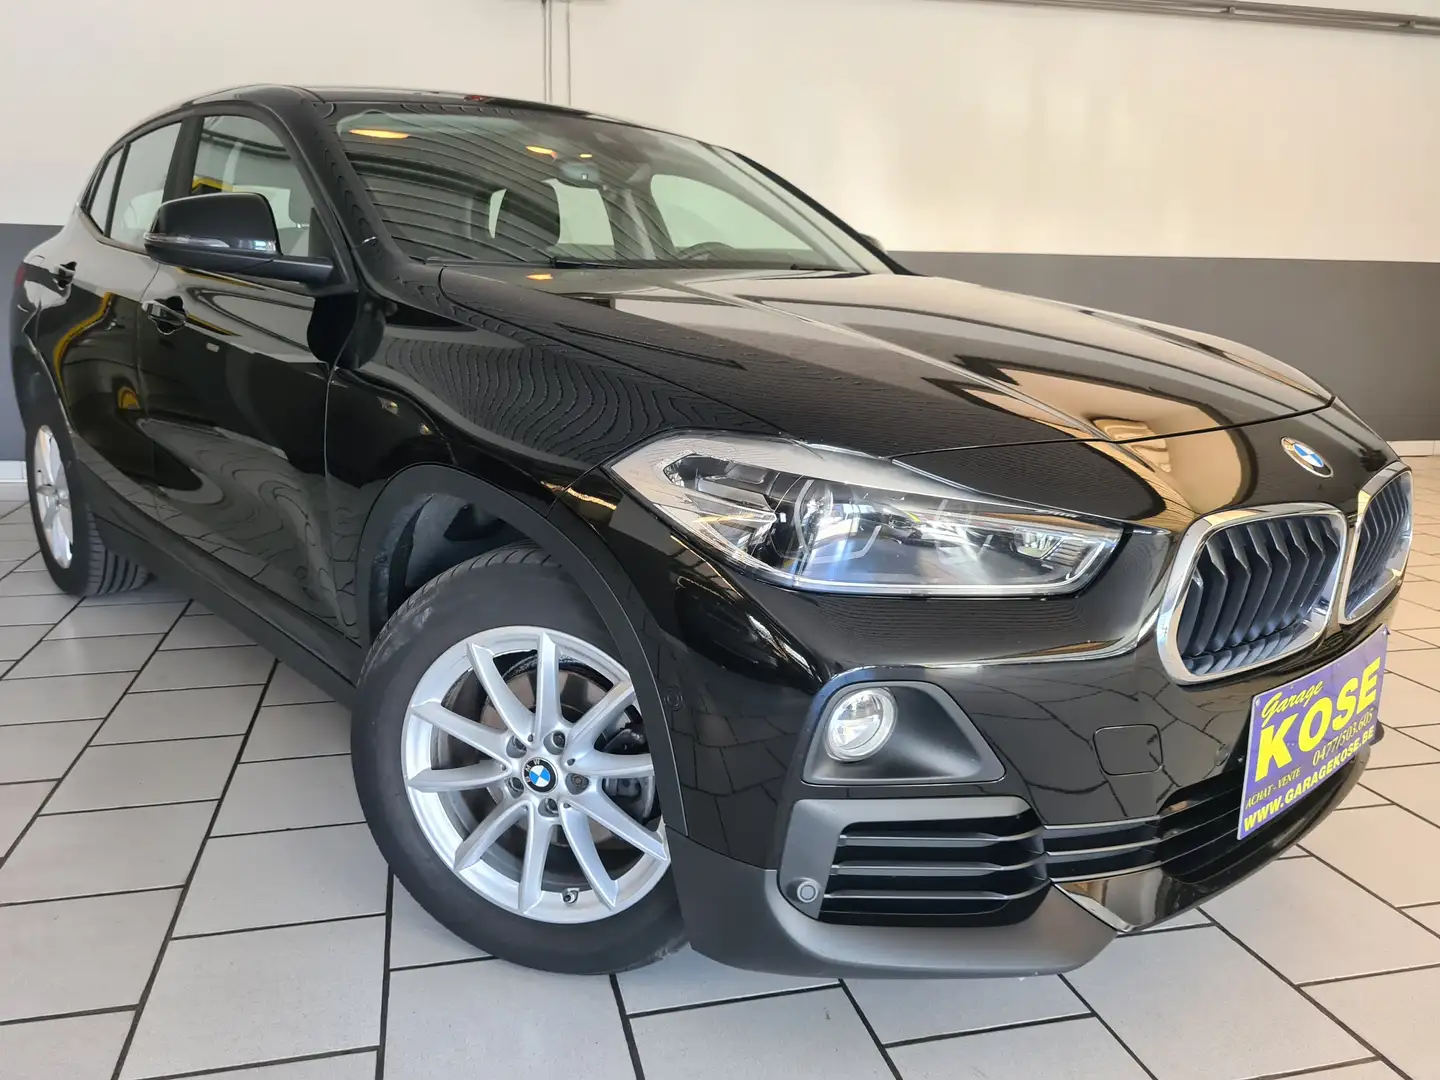 BMW X2 1496 S DRIVE//PHARES LEDS//SIEGES SPORT/1ERE MAIN Nero - 1